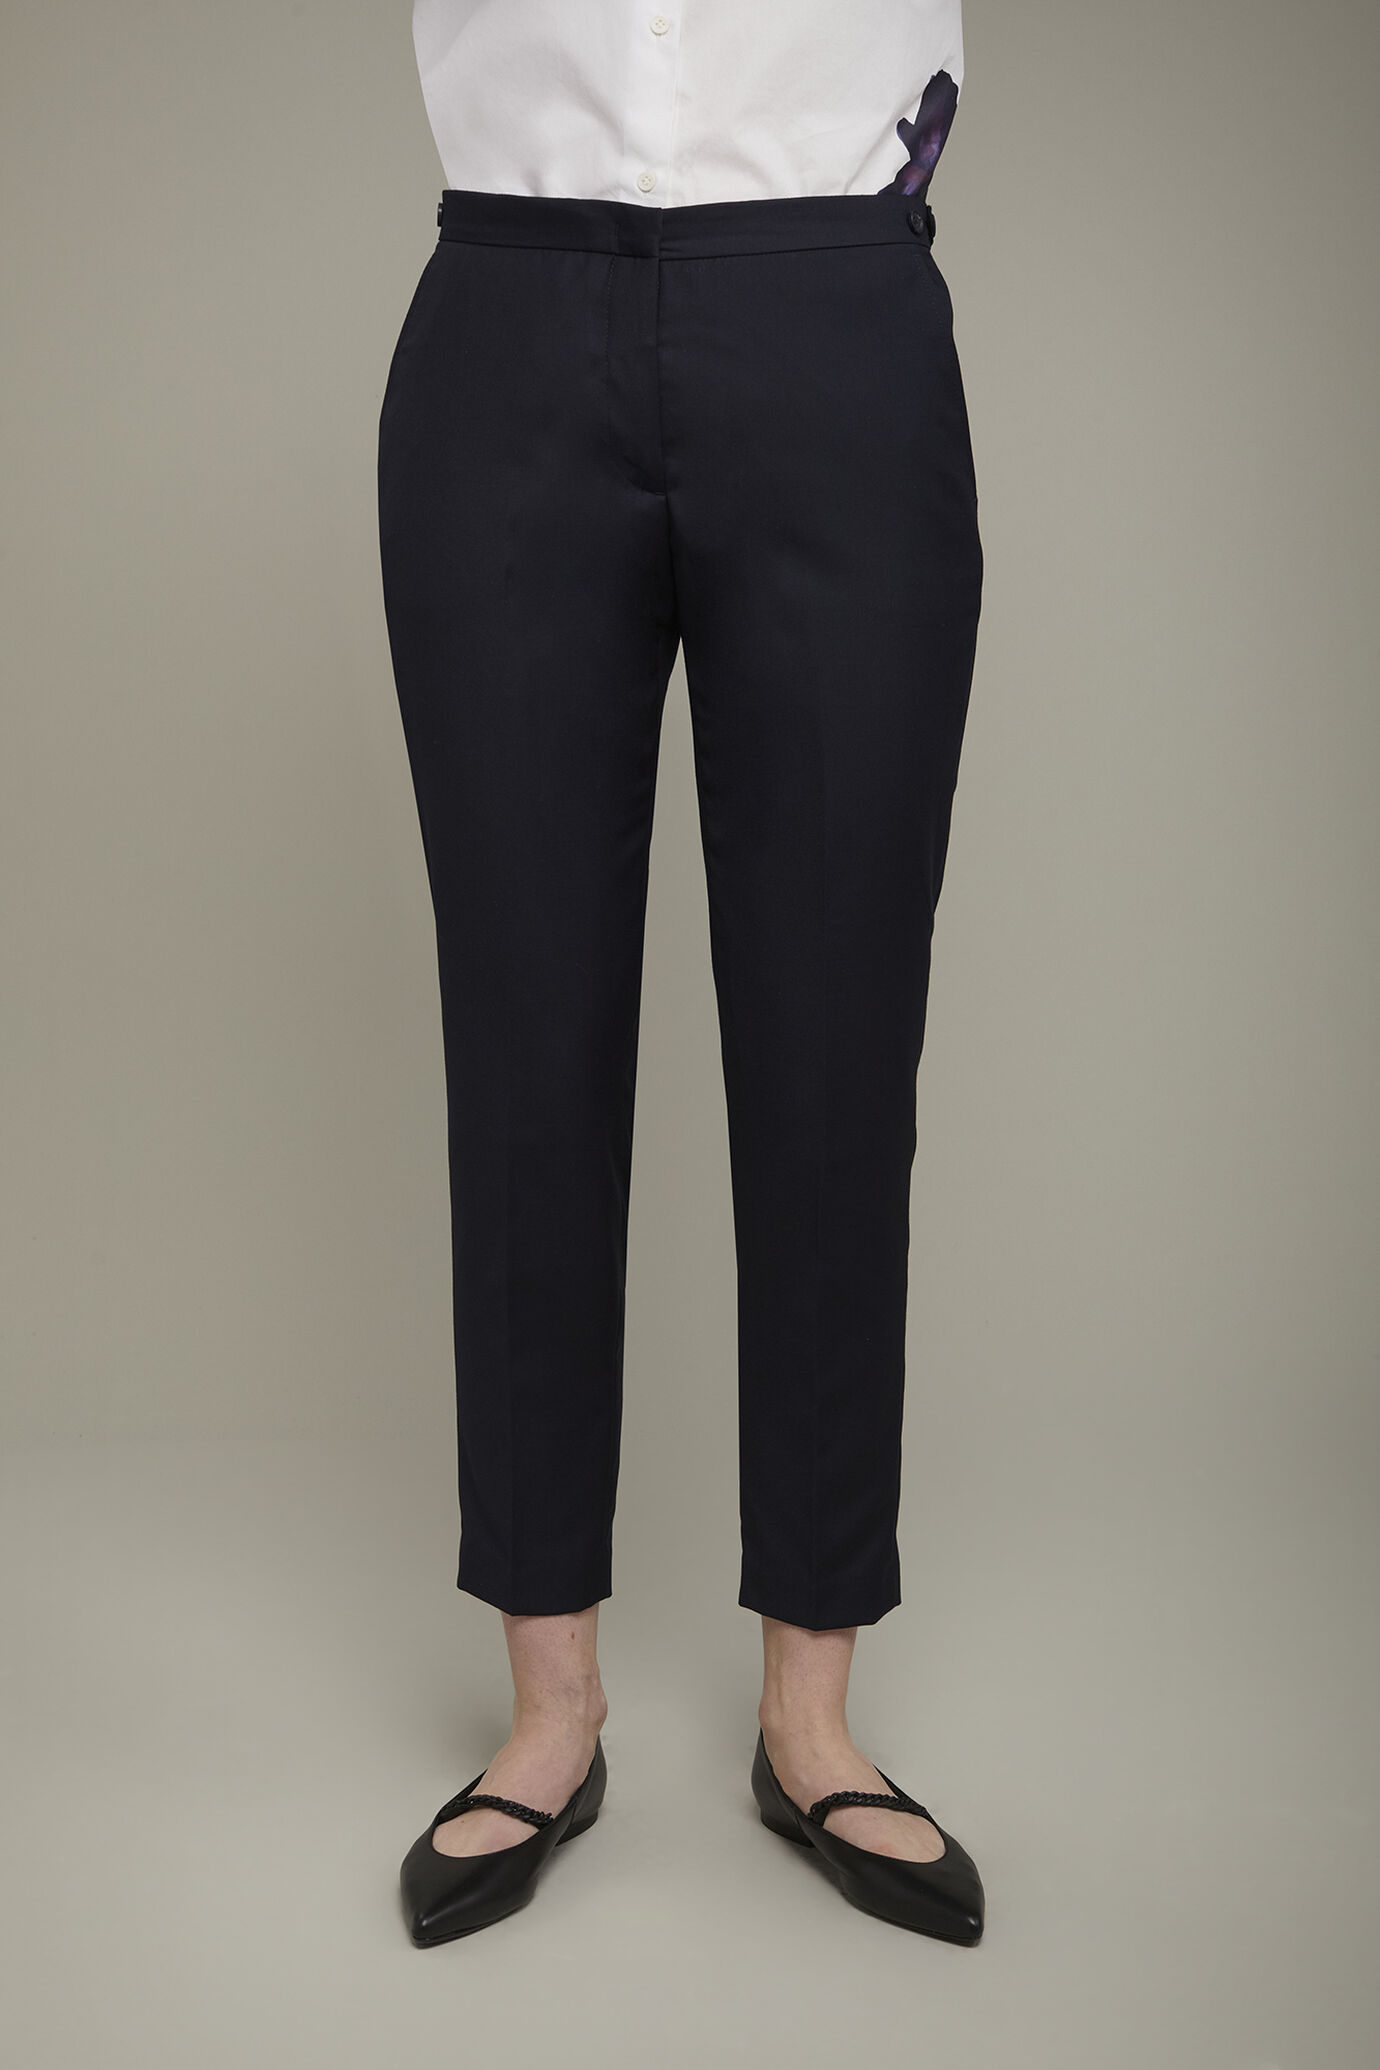 Women's classic solid color chino pants image number 3